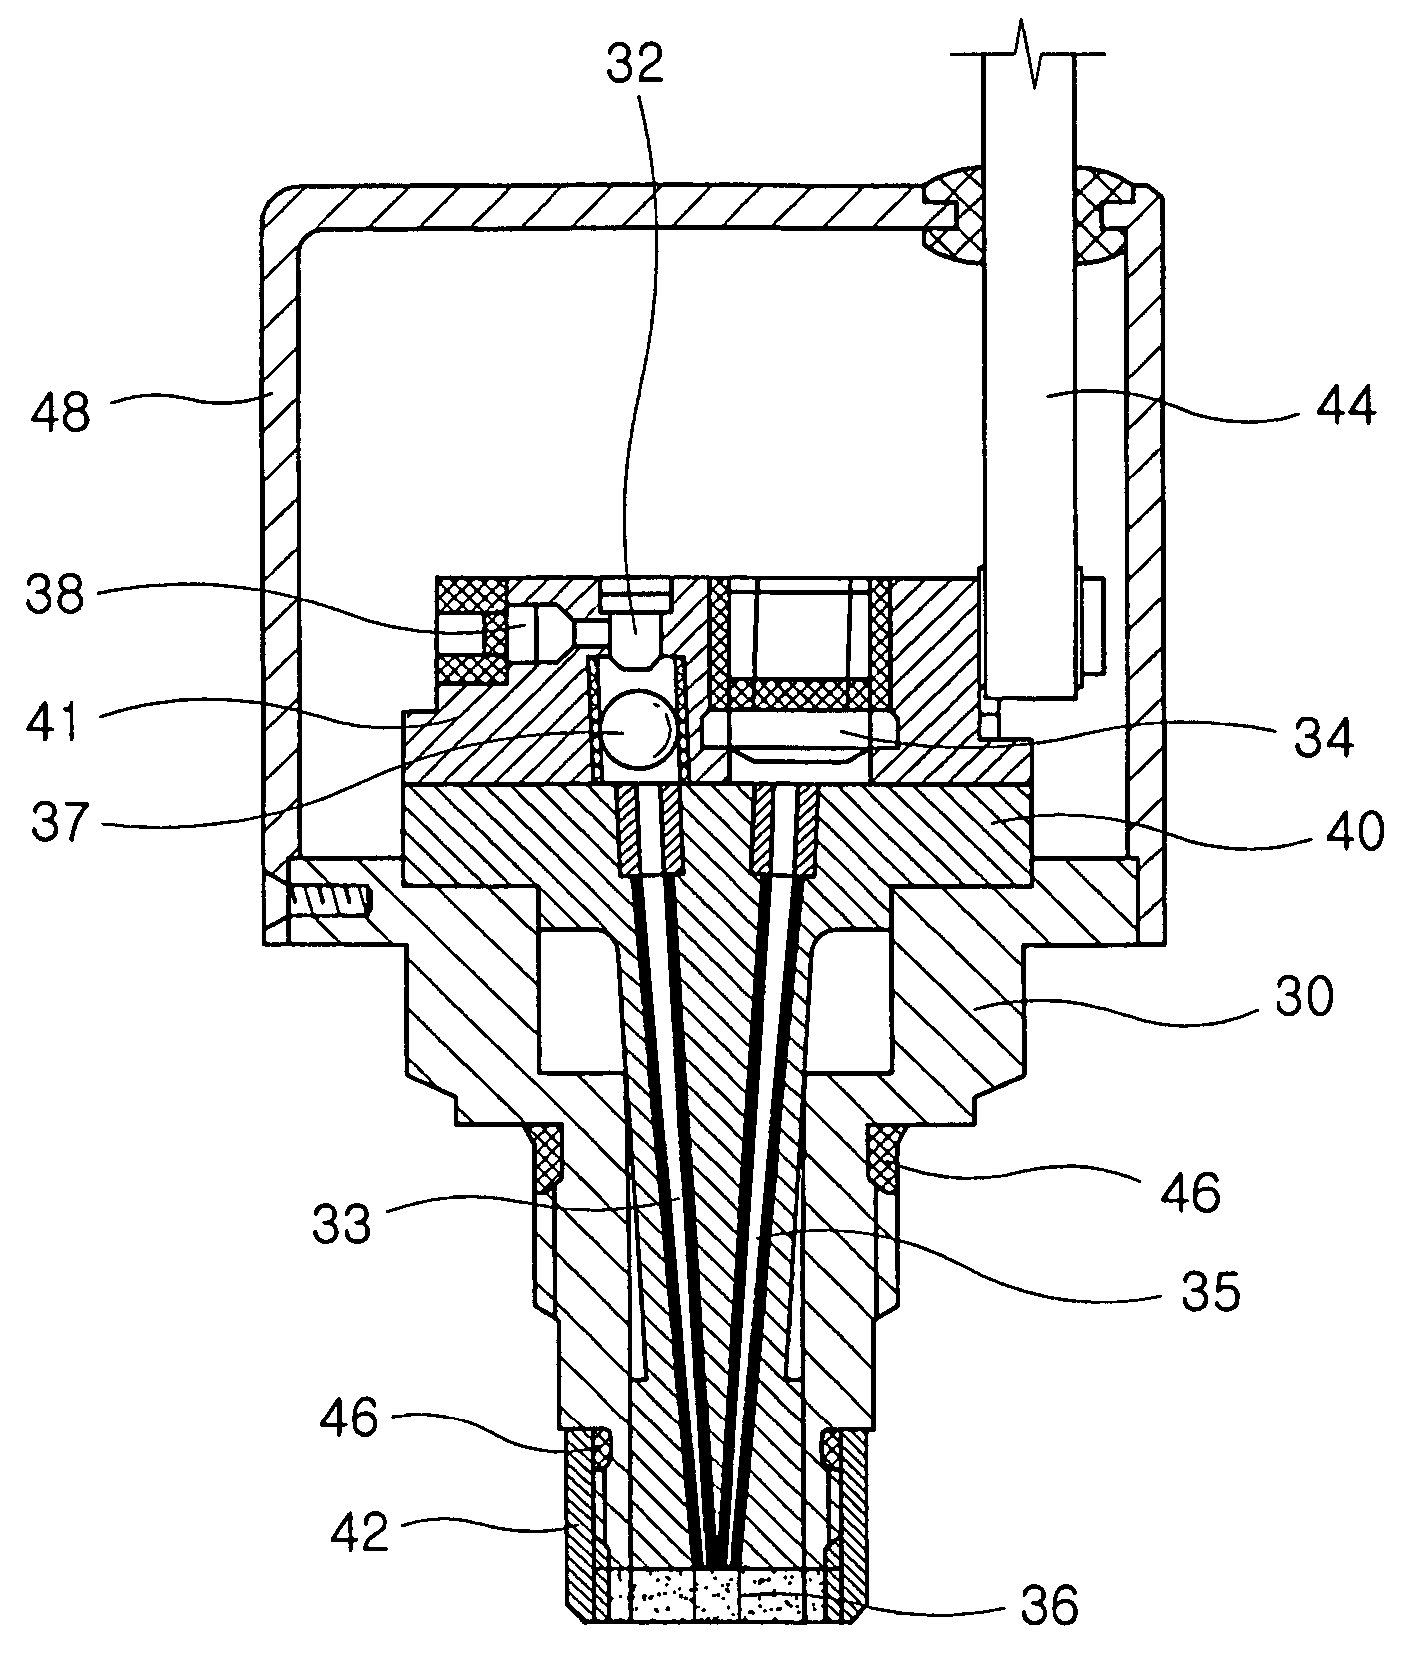 Method and device for monitoring oil oxidation in real time by measuring fluorescence